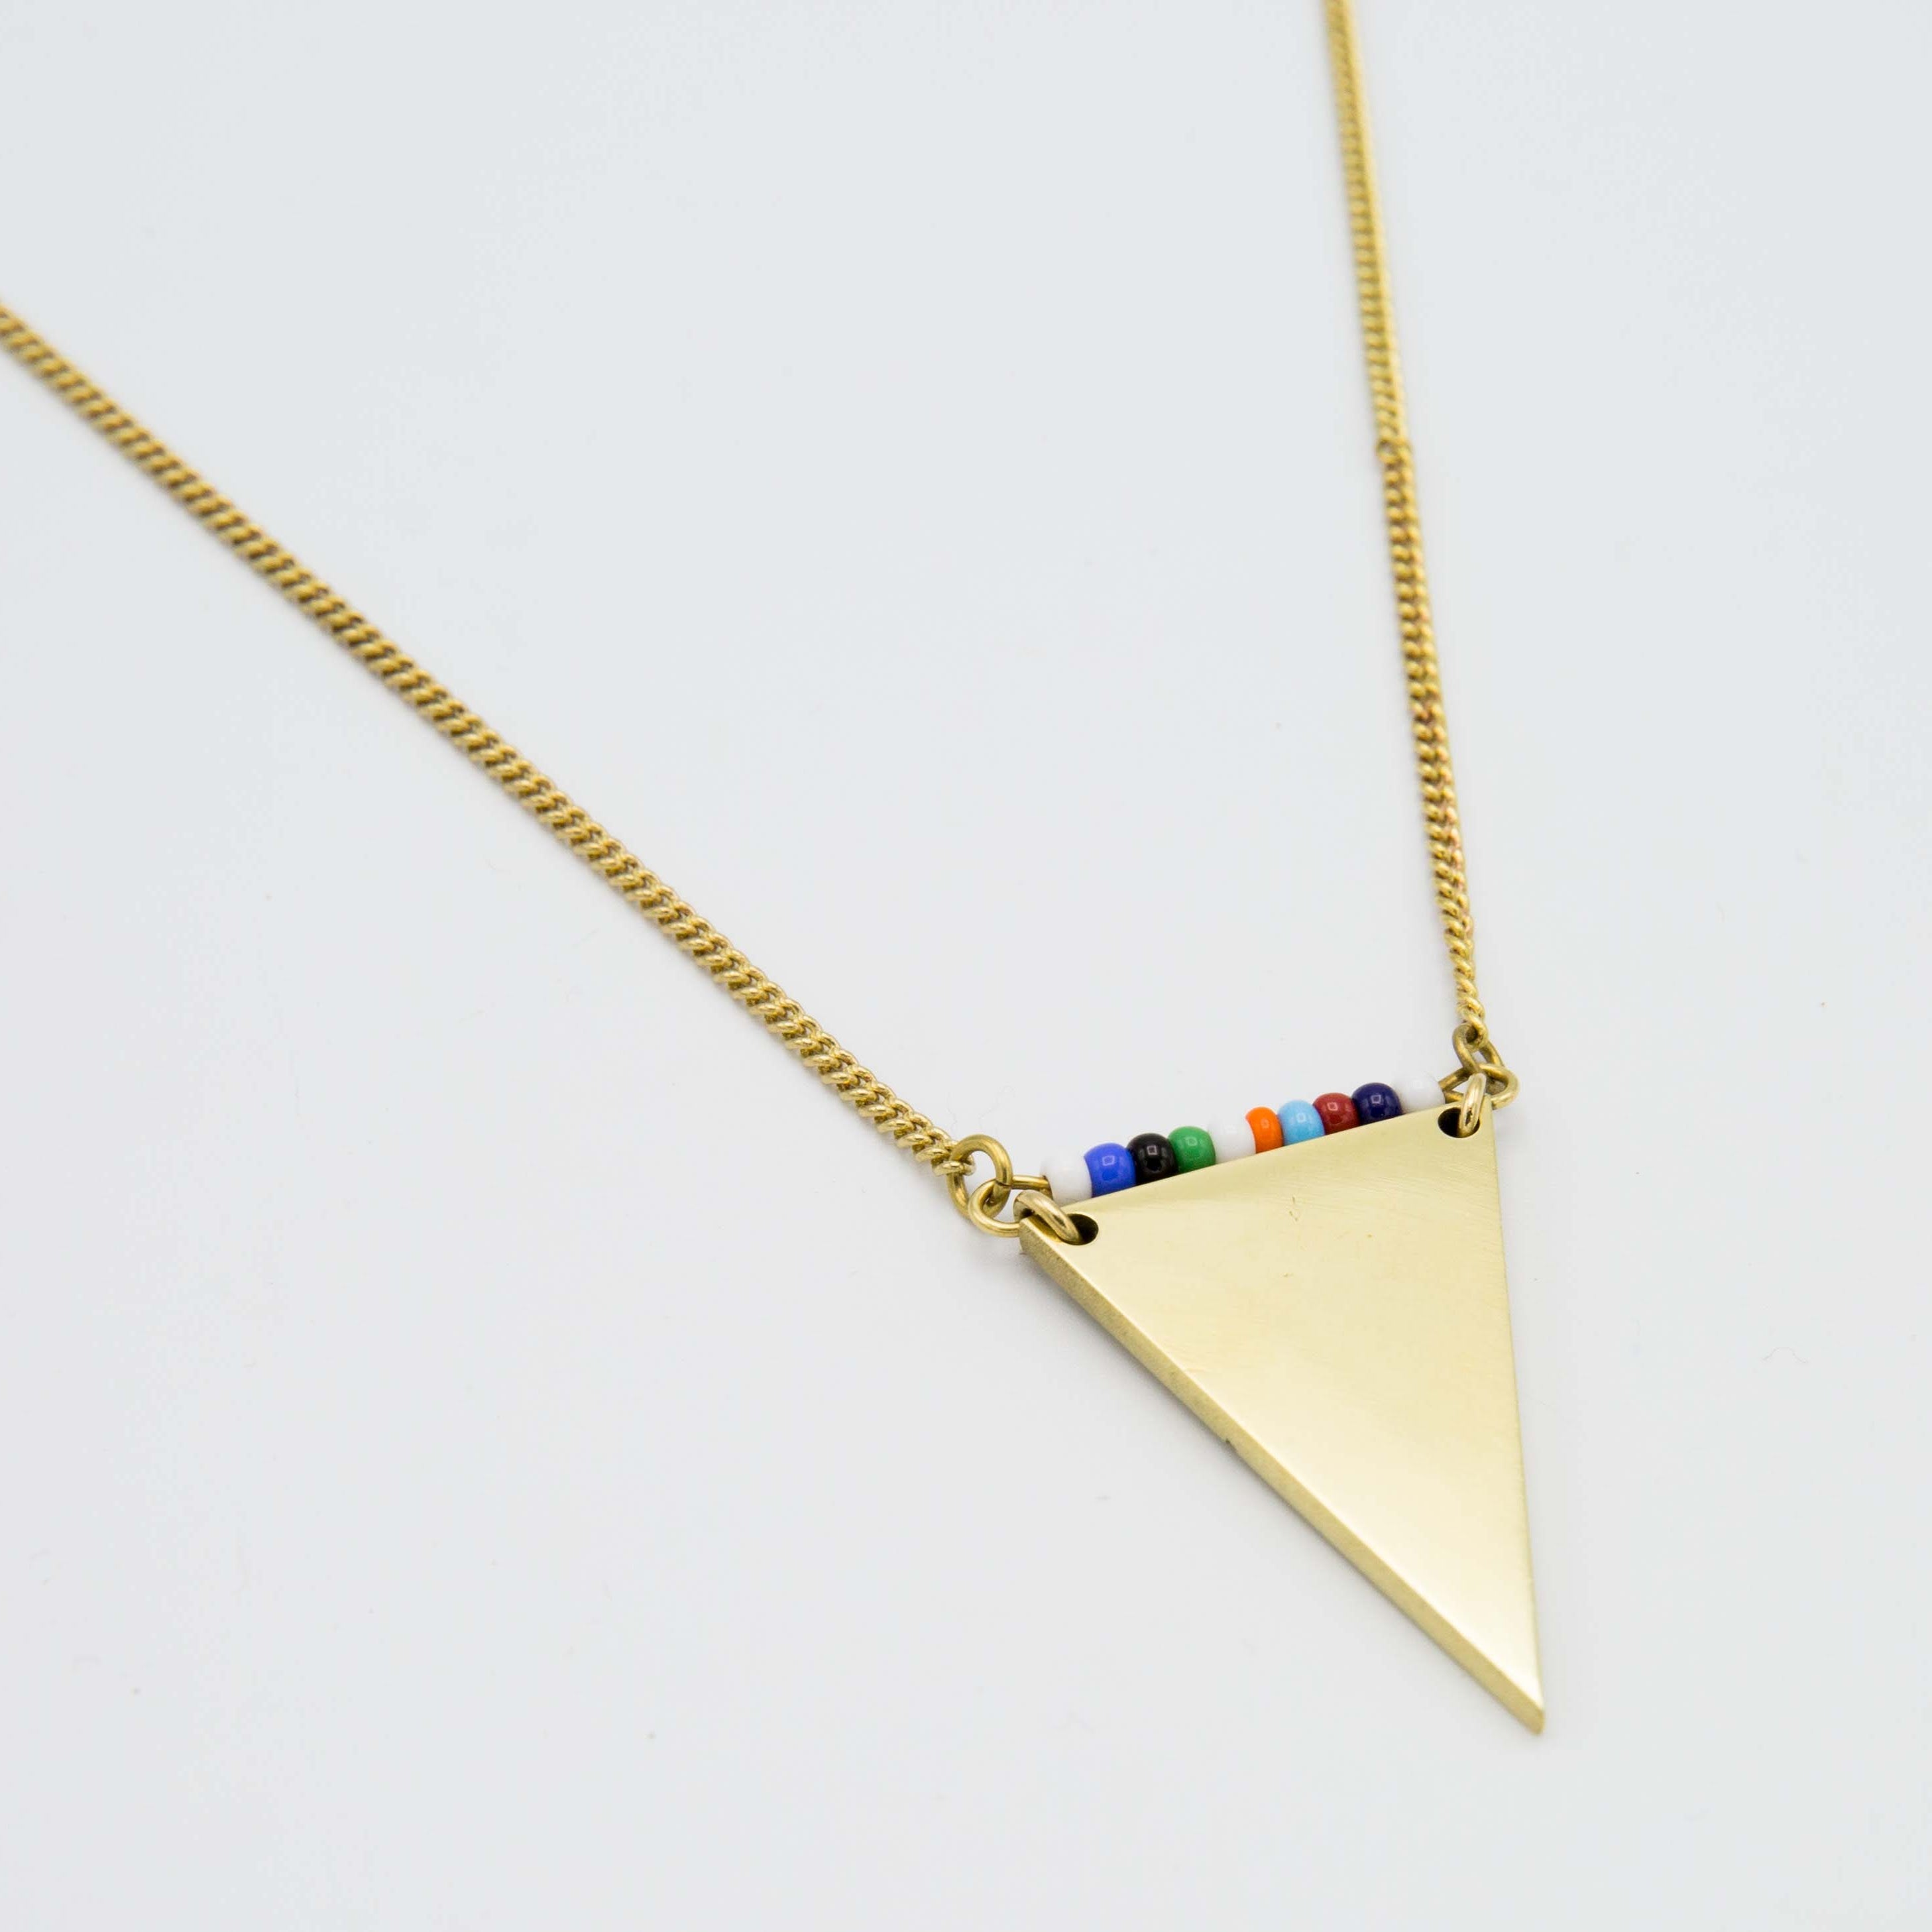 Triangle Pendant Necklace - Kenyan materials and design for a fair trade boutique